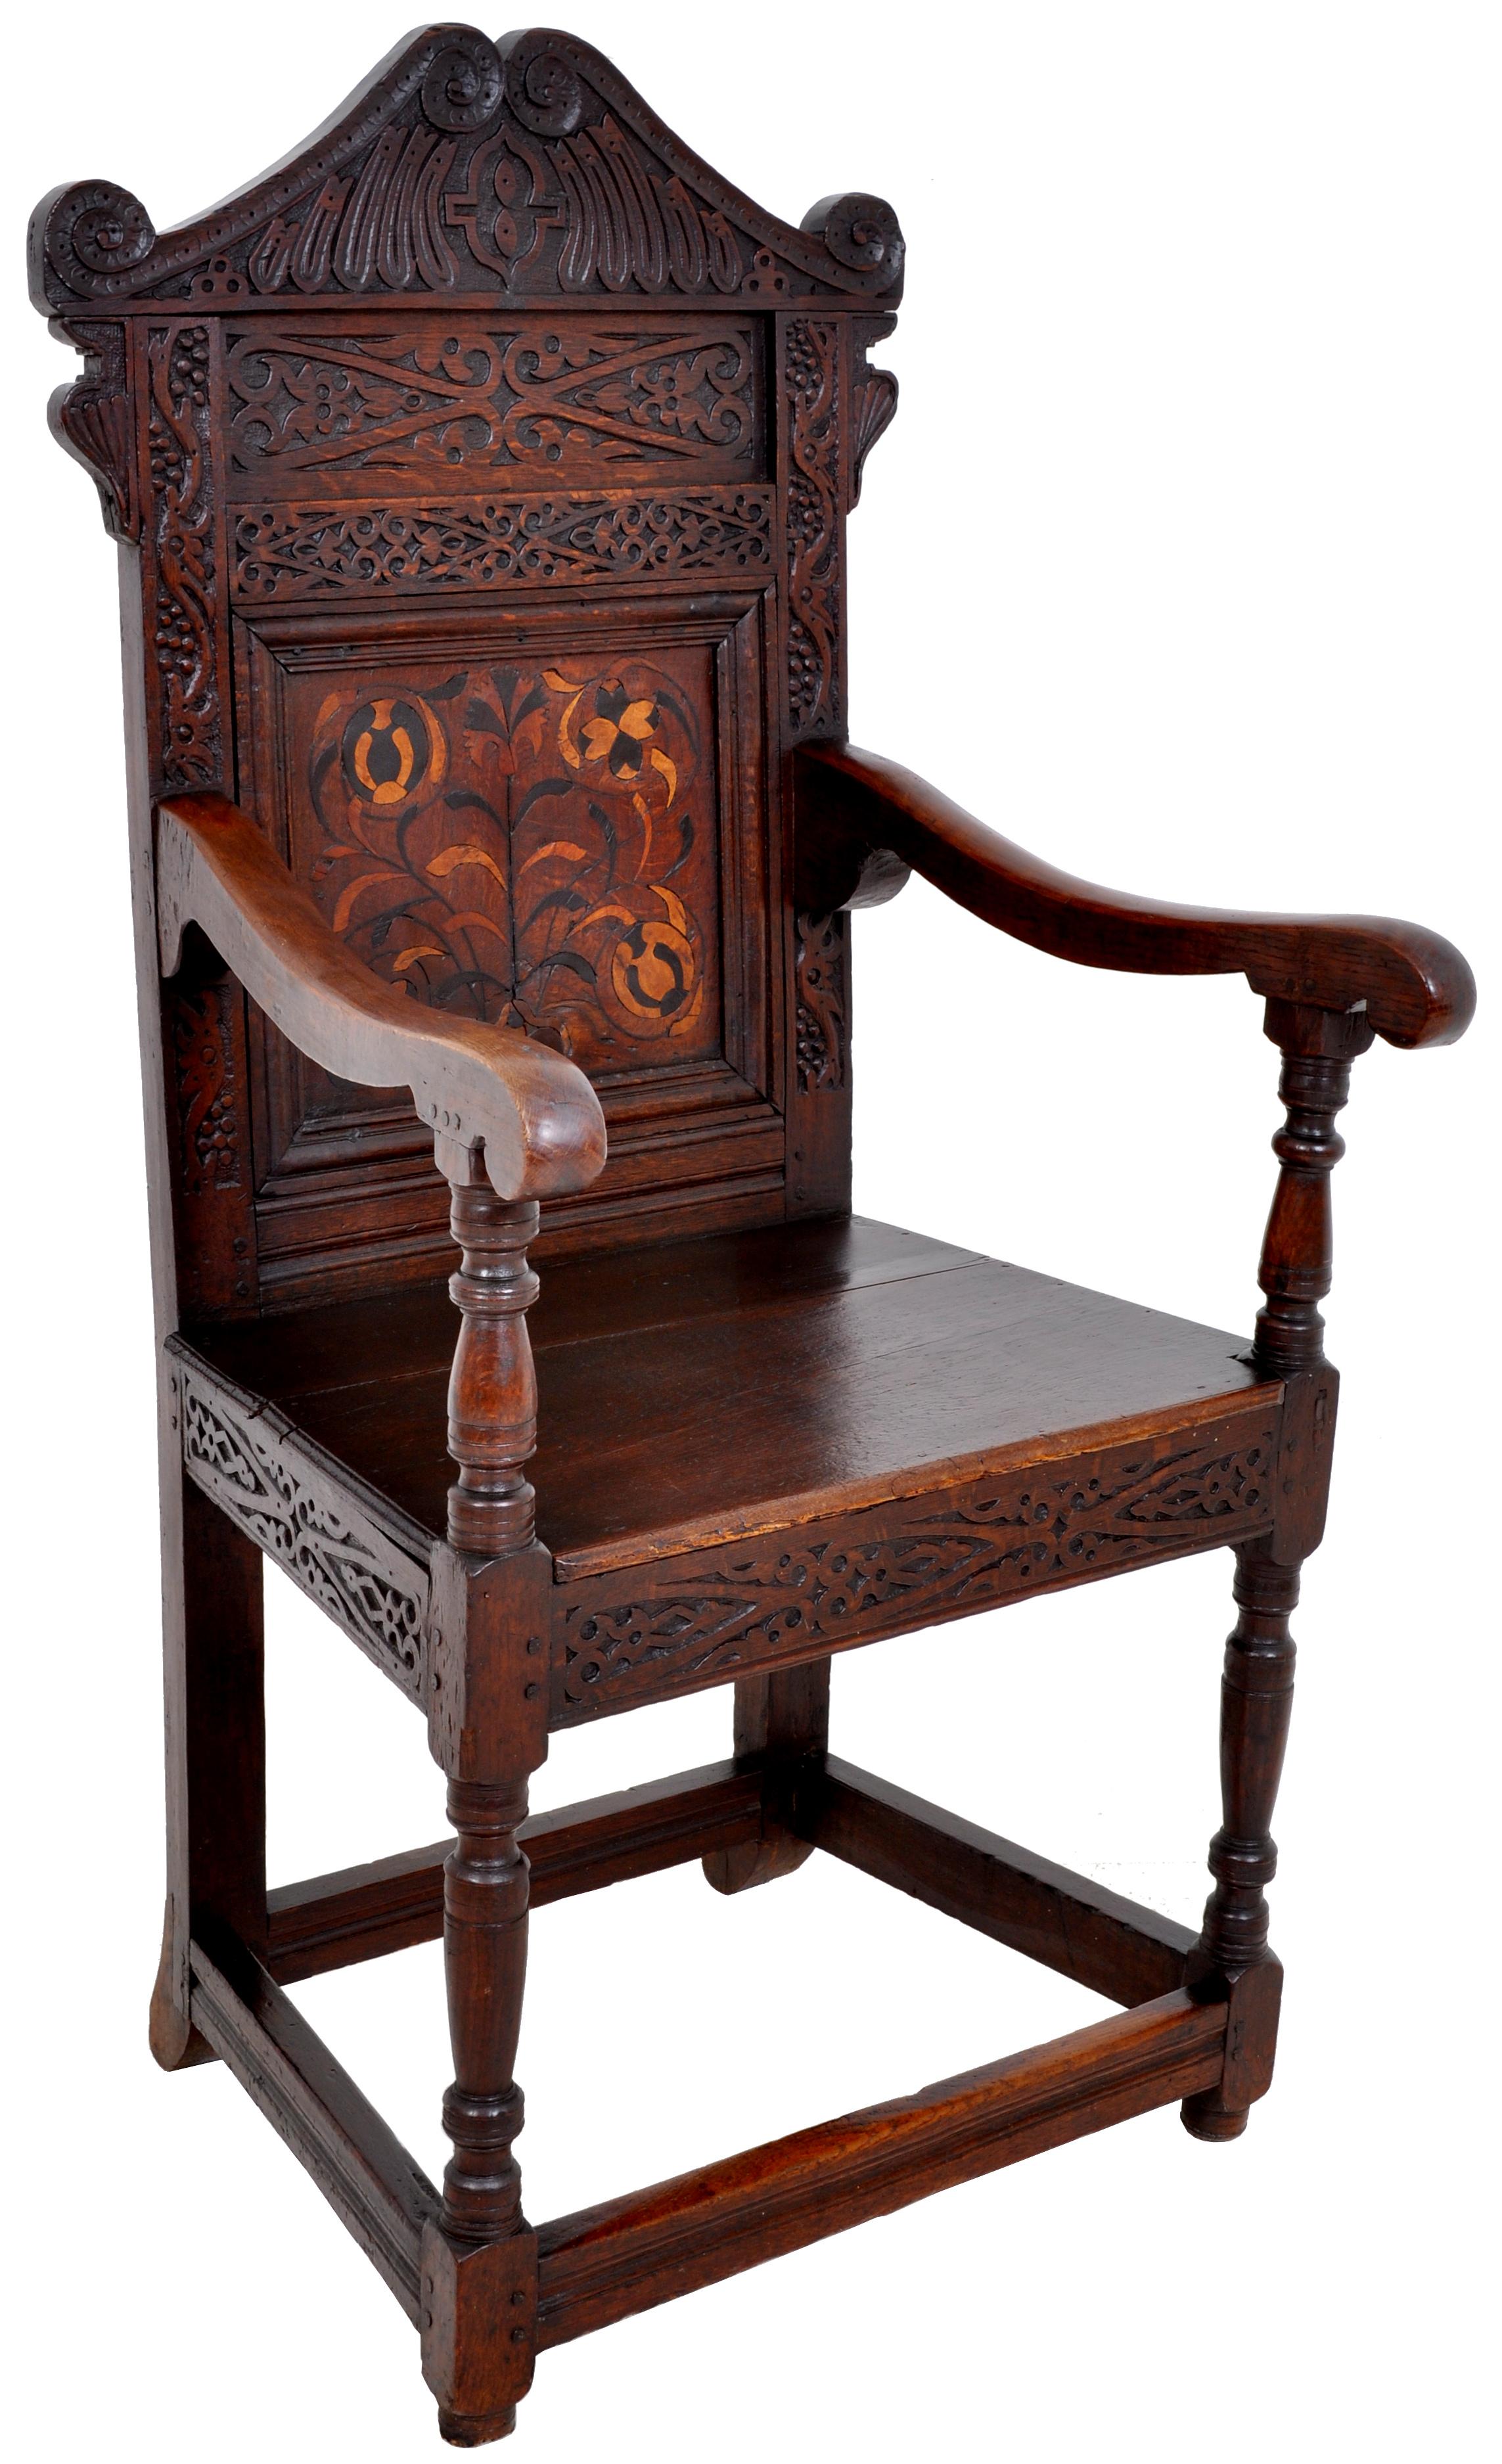 A rare antique inlaid oak carved Wainscot chair, Charles II period, circa 1670. The chair having a carved top rail pediment, the back carved with fruiting vines and geometric devices. To the center of the chair back is an inlaid floral panel of